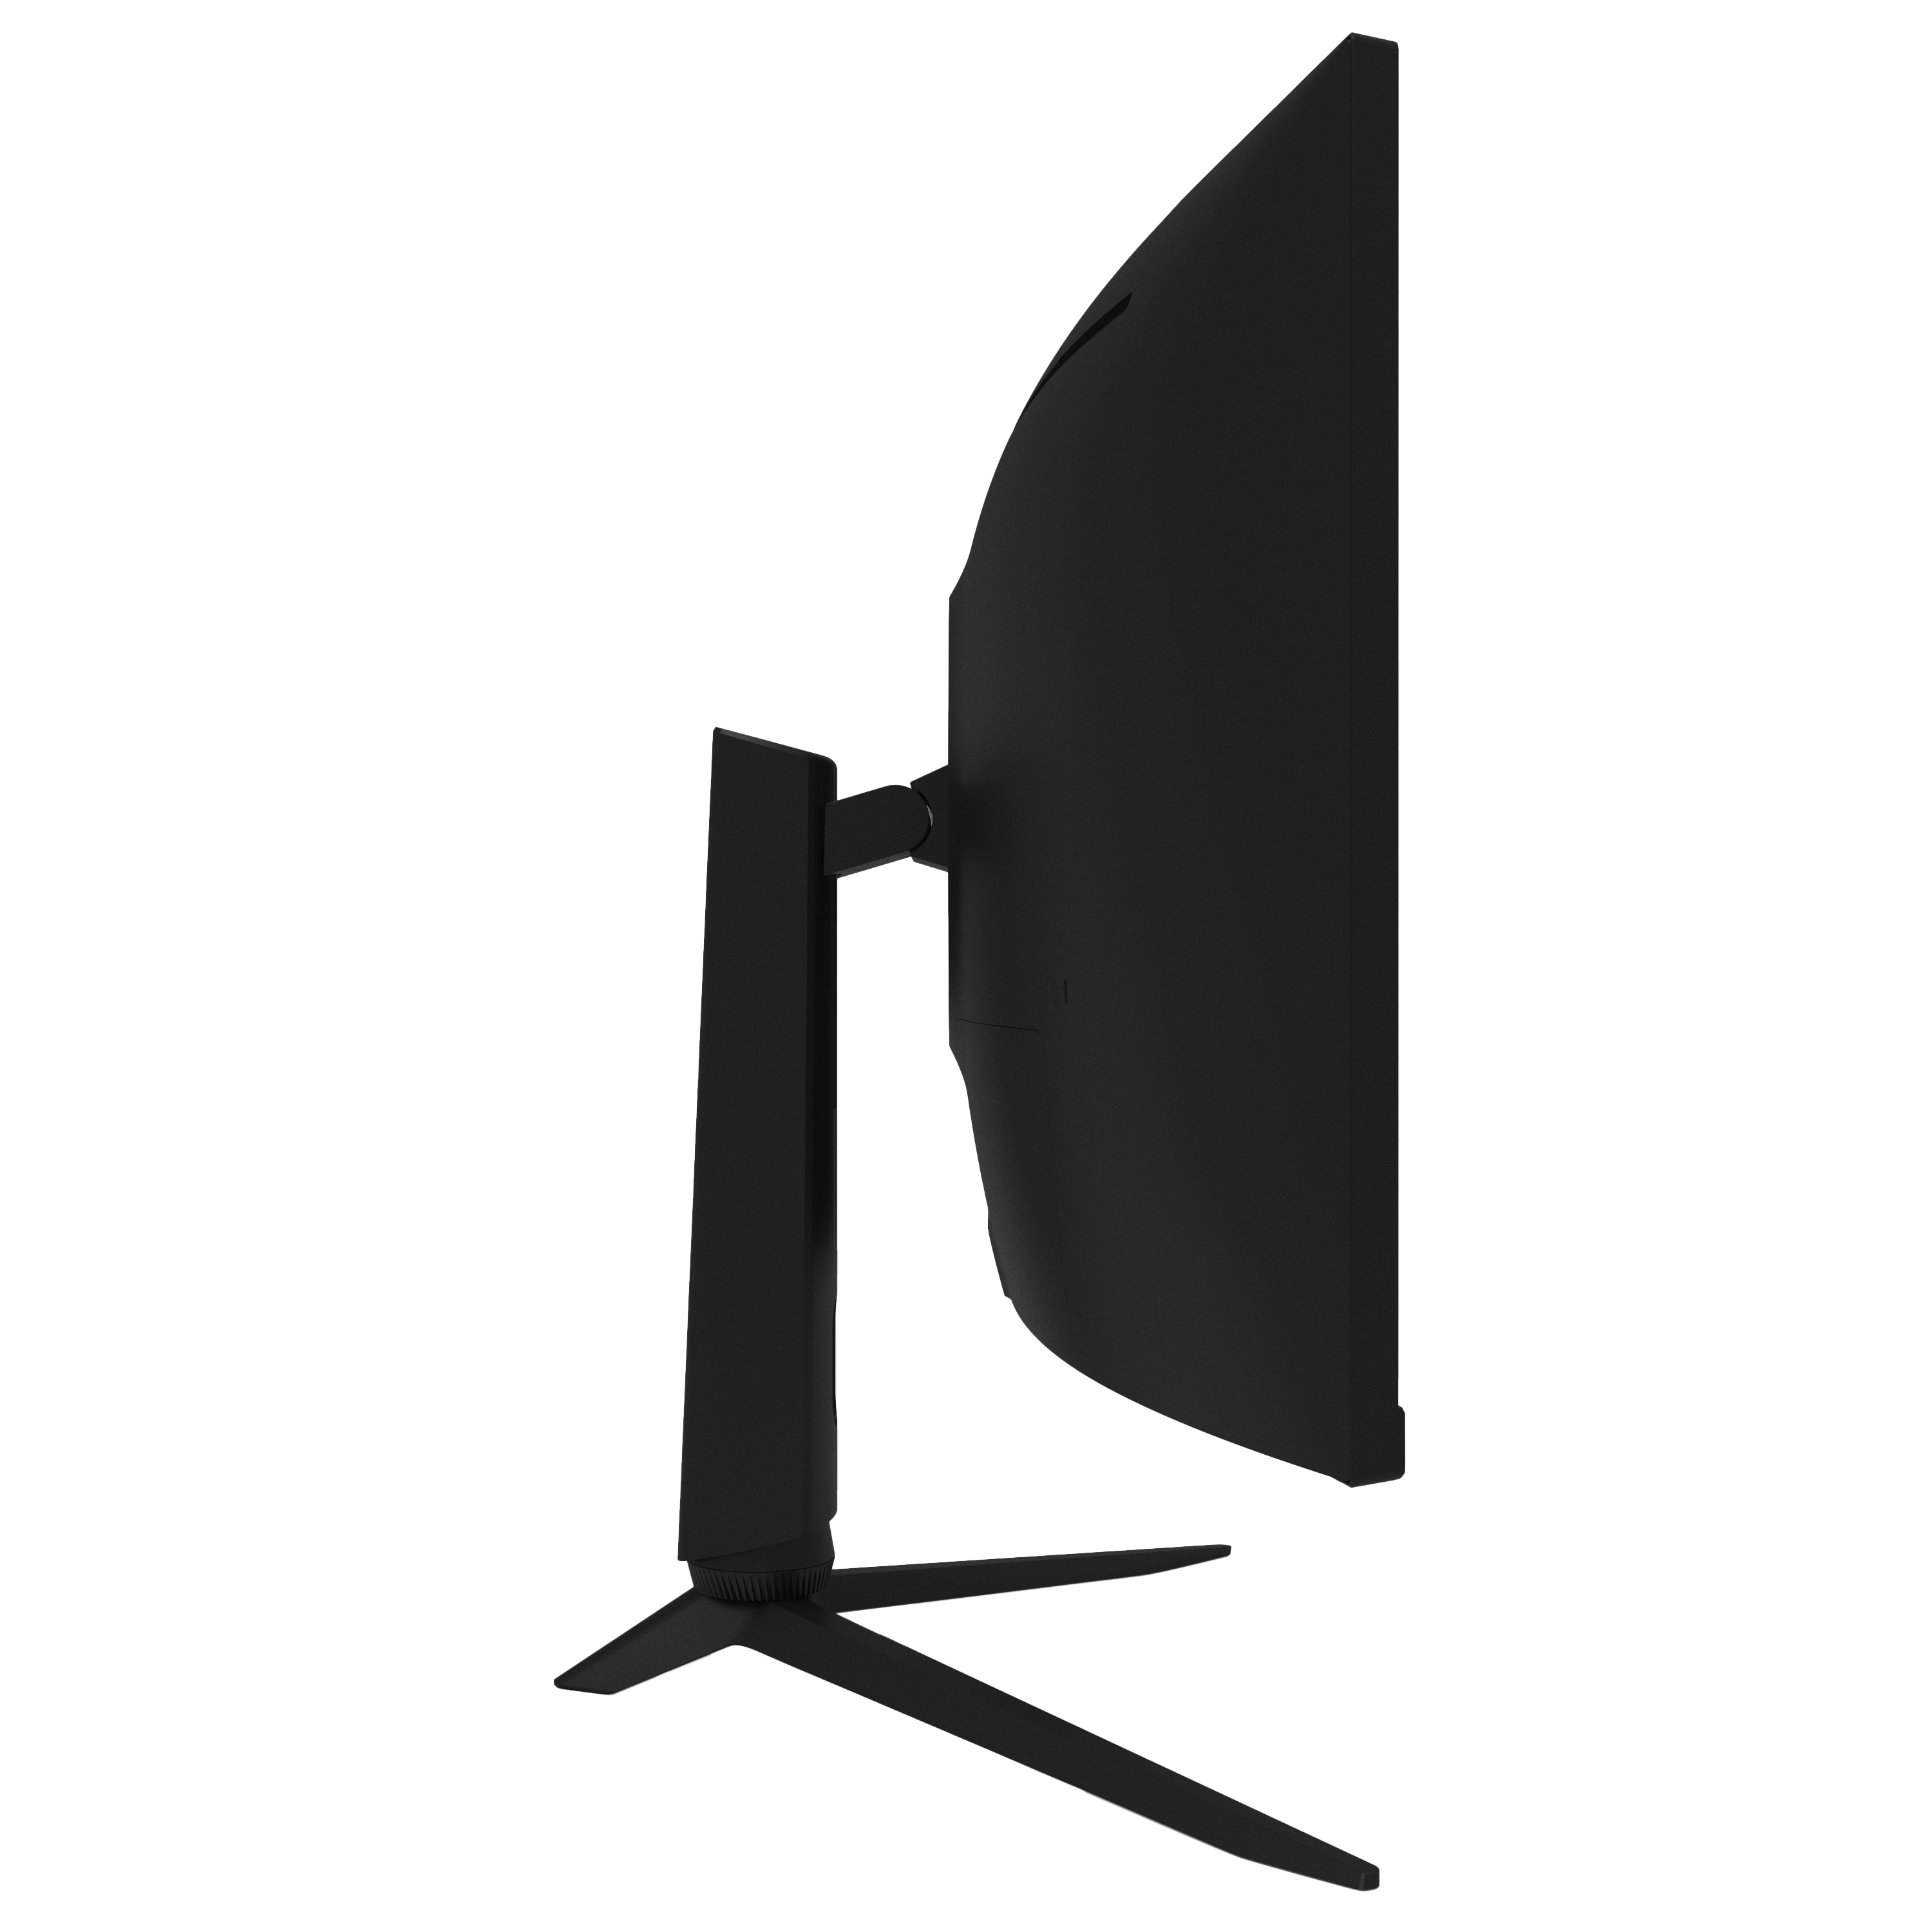 Pixio PXC348C Ultimate Ultra Wide Curved Productivity Gaming Monitor